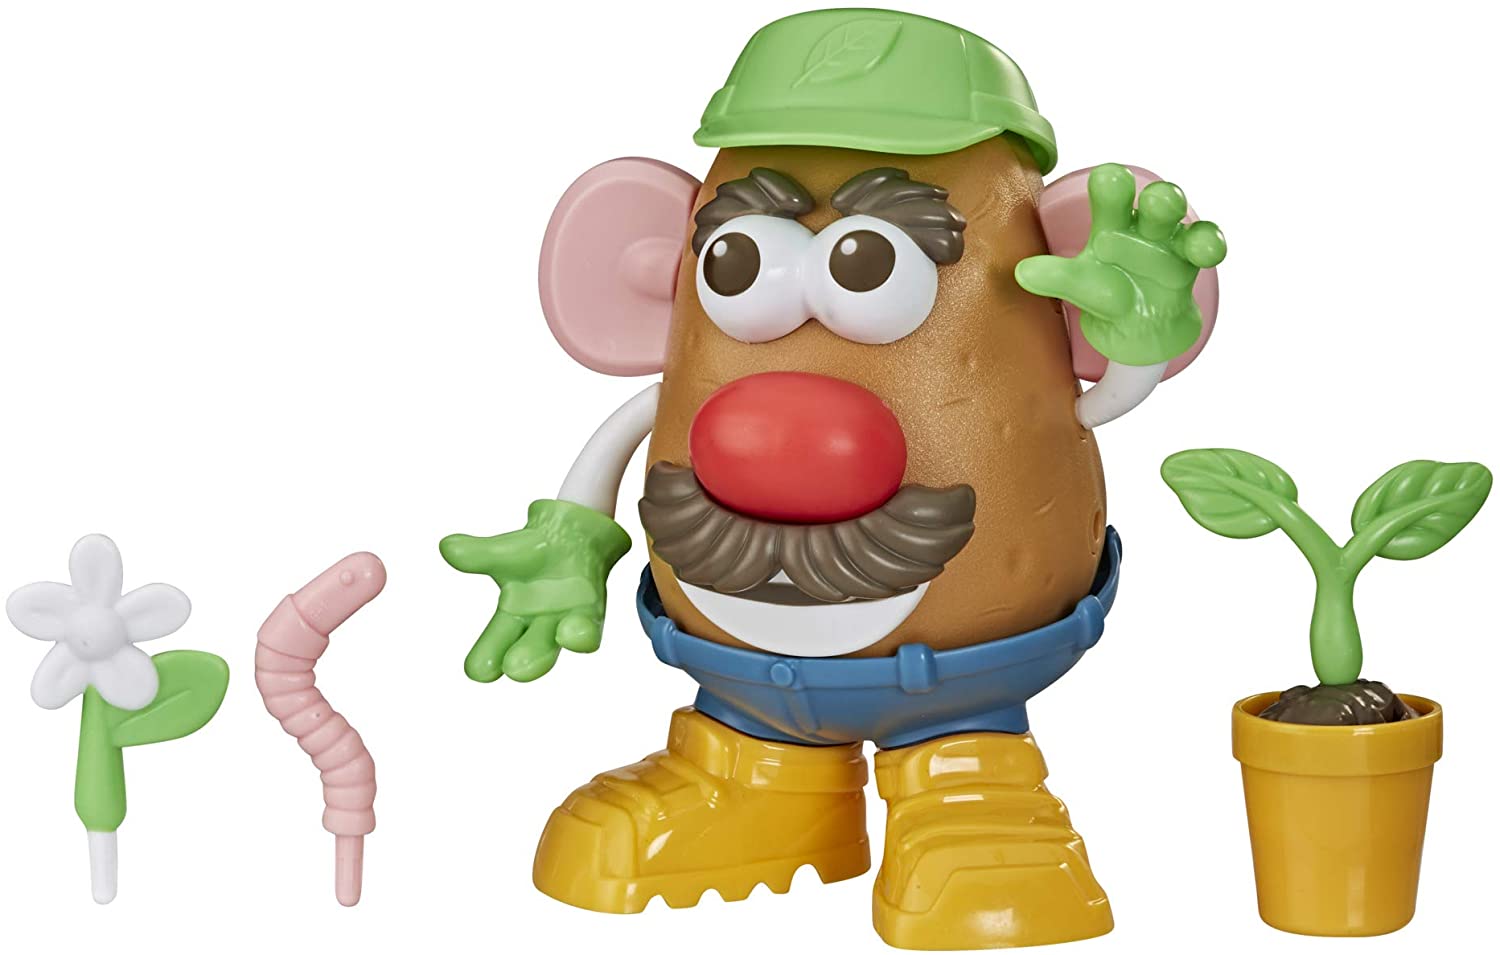 Mr Potato Head Goes Green Toy for Kids Ages 3 and up, Made with Plant-Based Plastic and FSC-Certified Paper Packaging - image 2 of 7